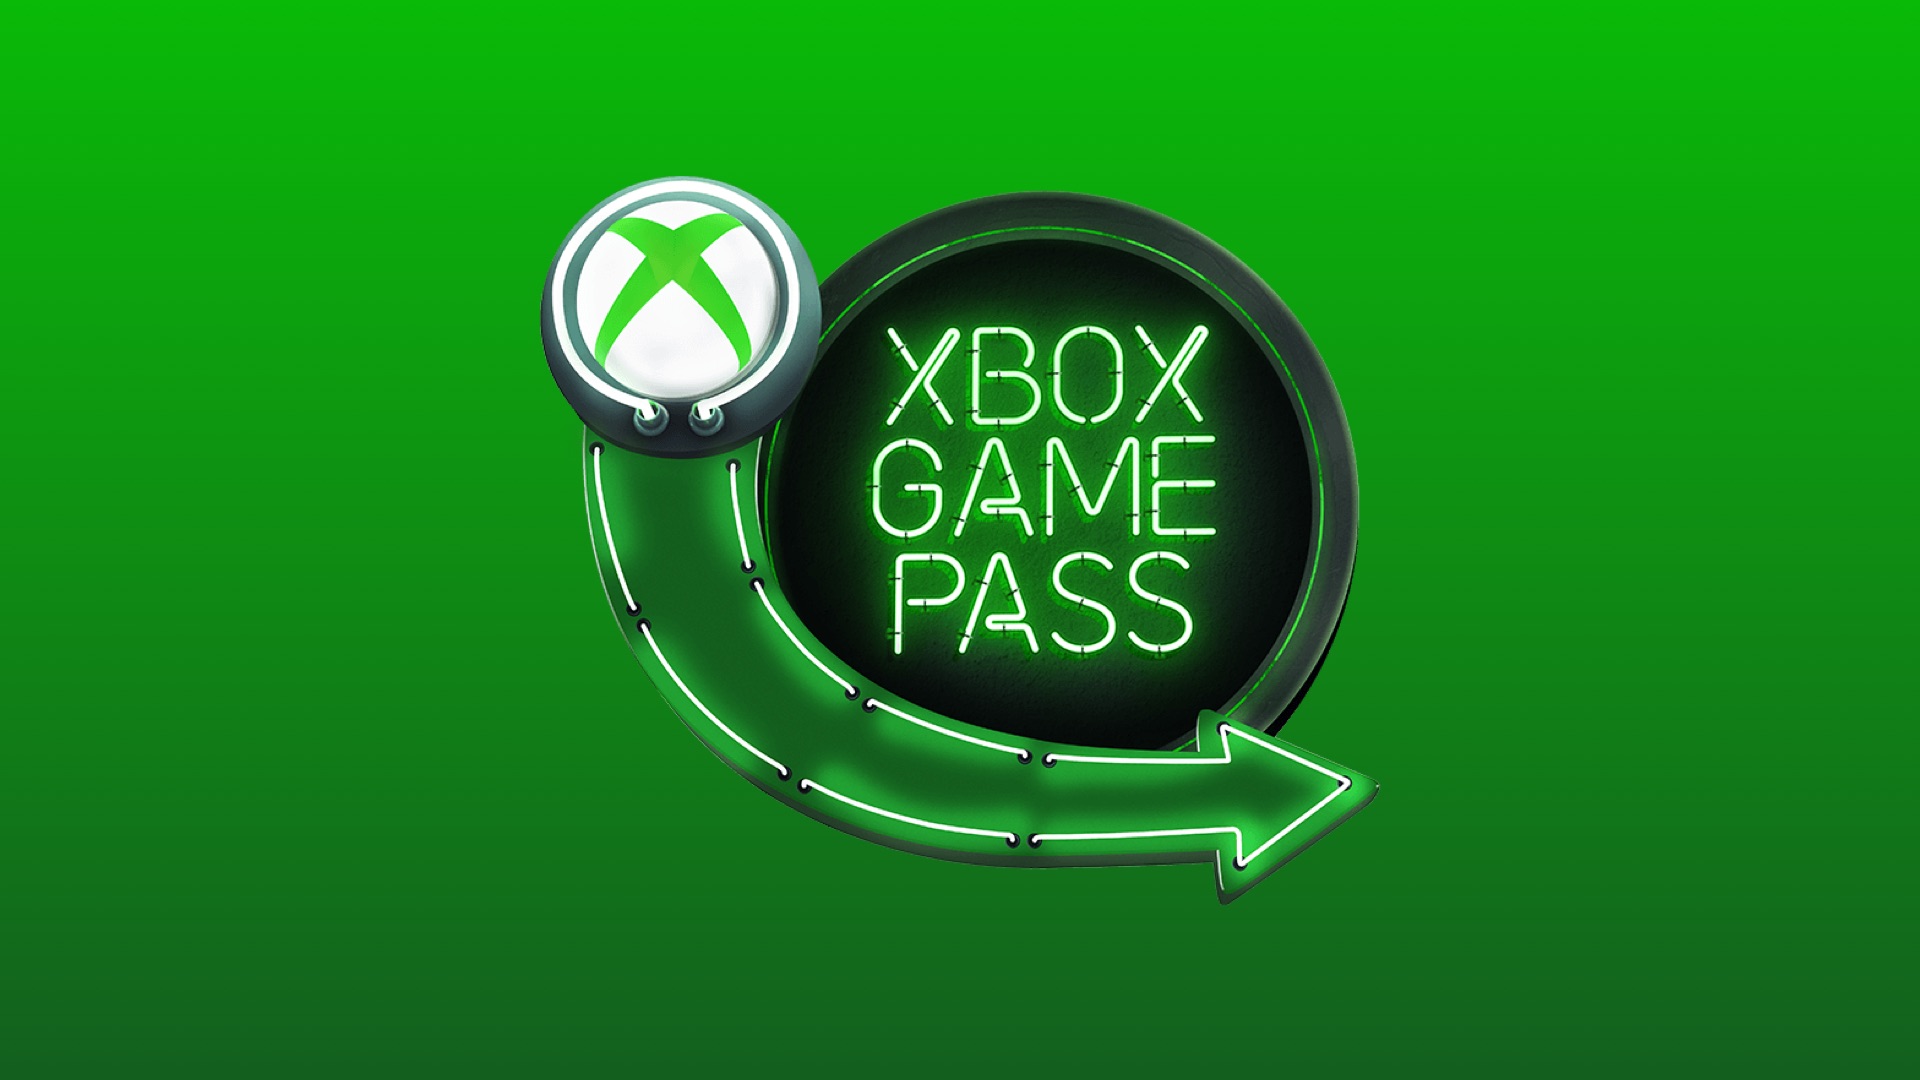 New Day One Game for 2022 is confirmed by Xbox Game Pass